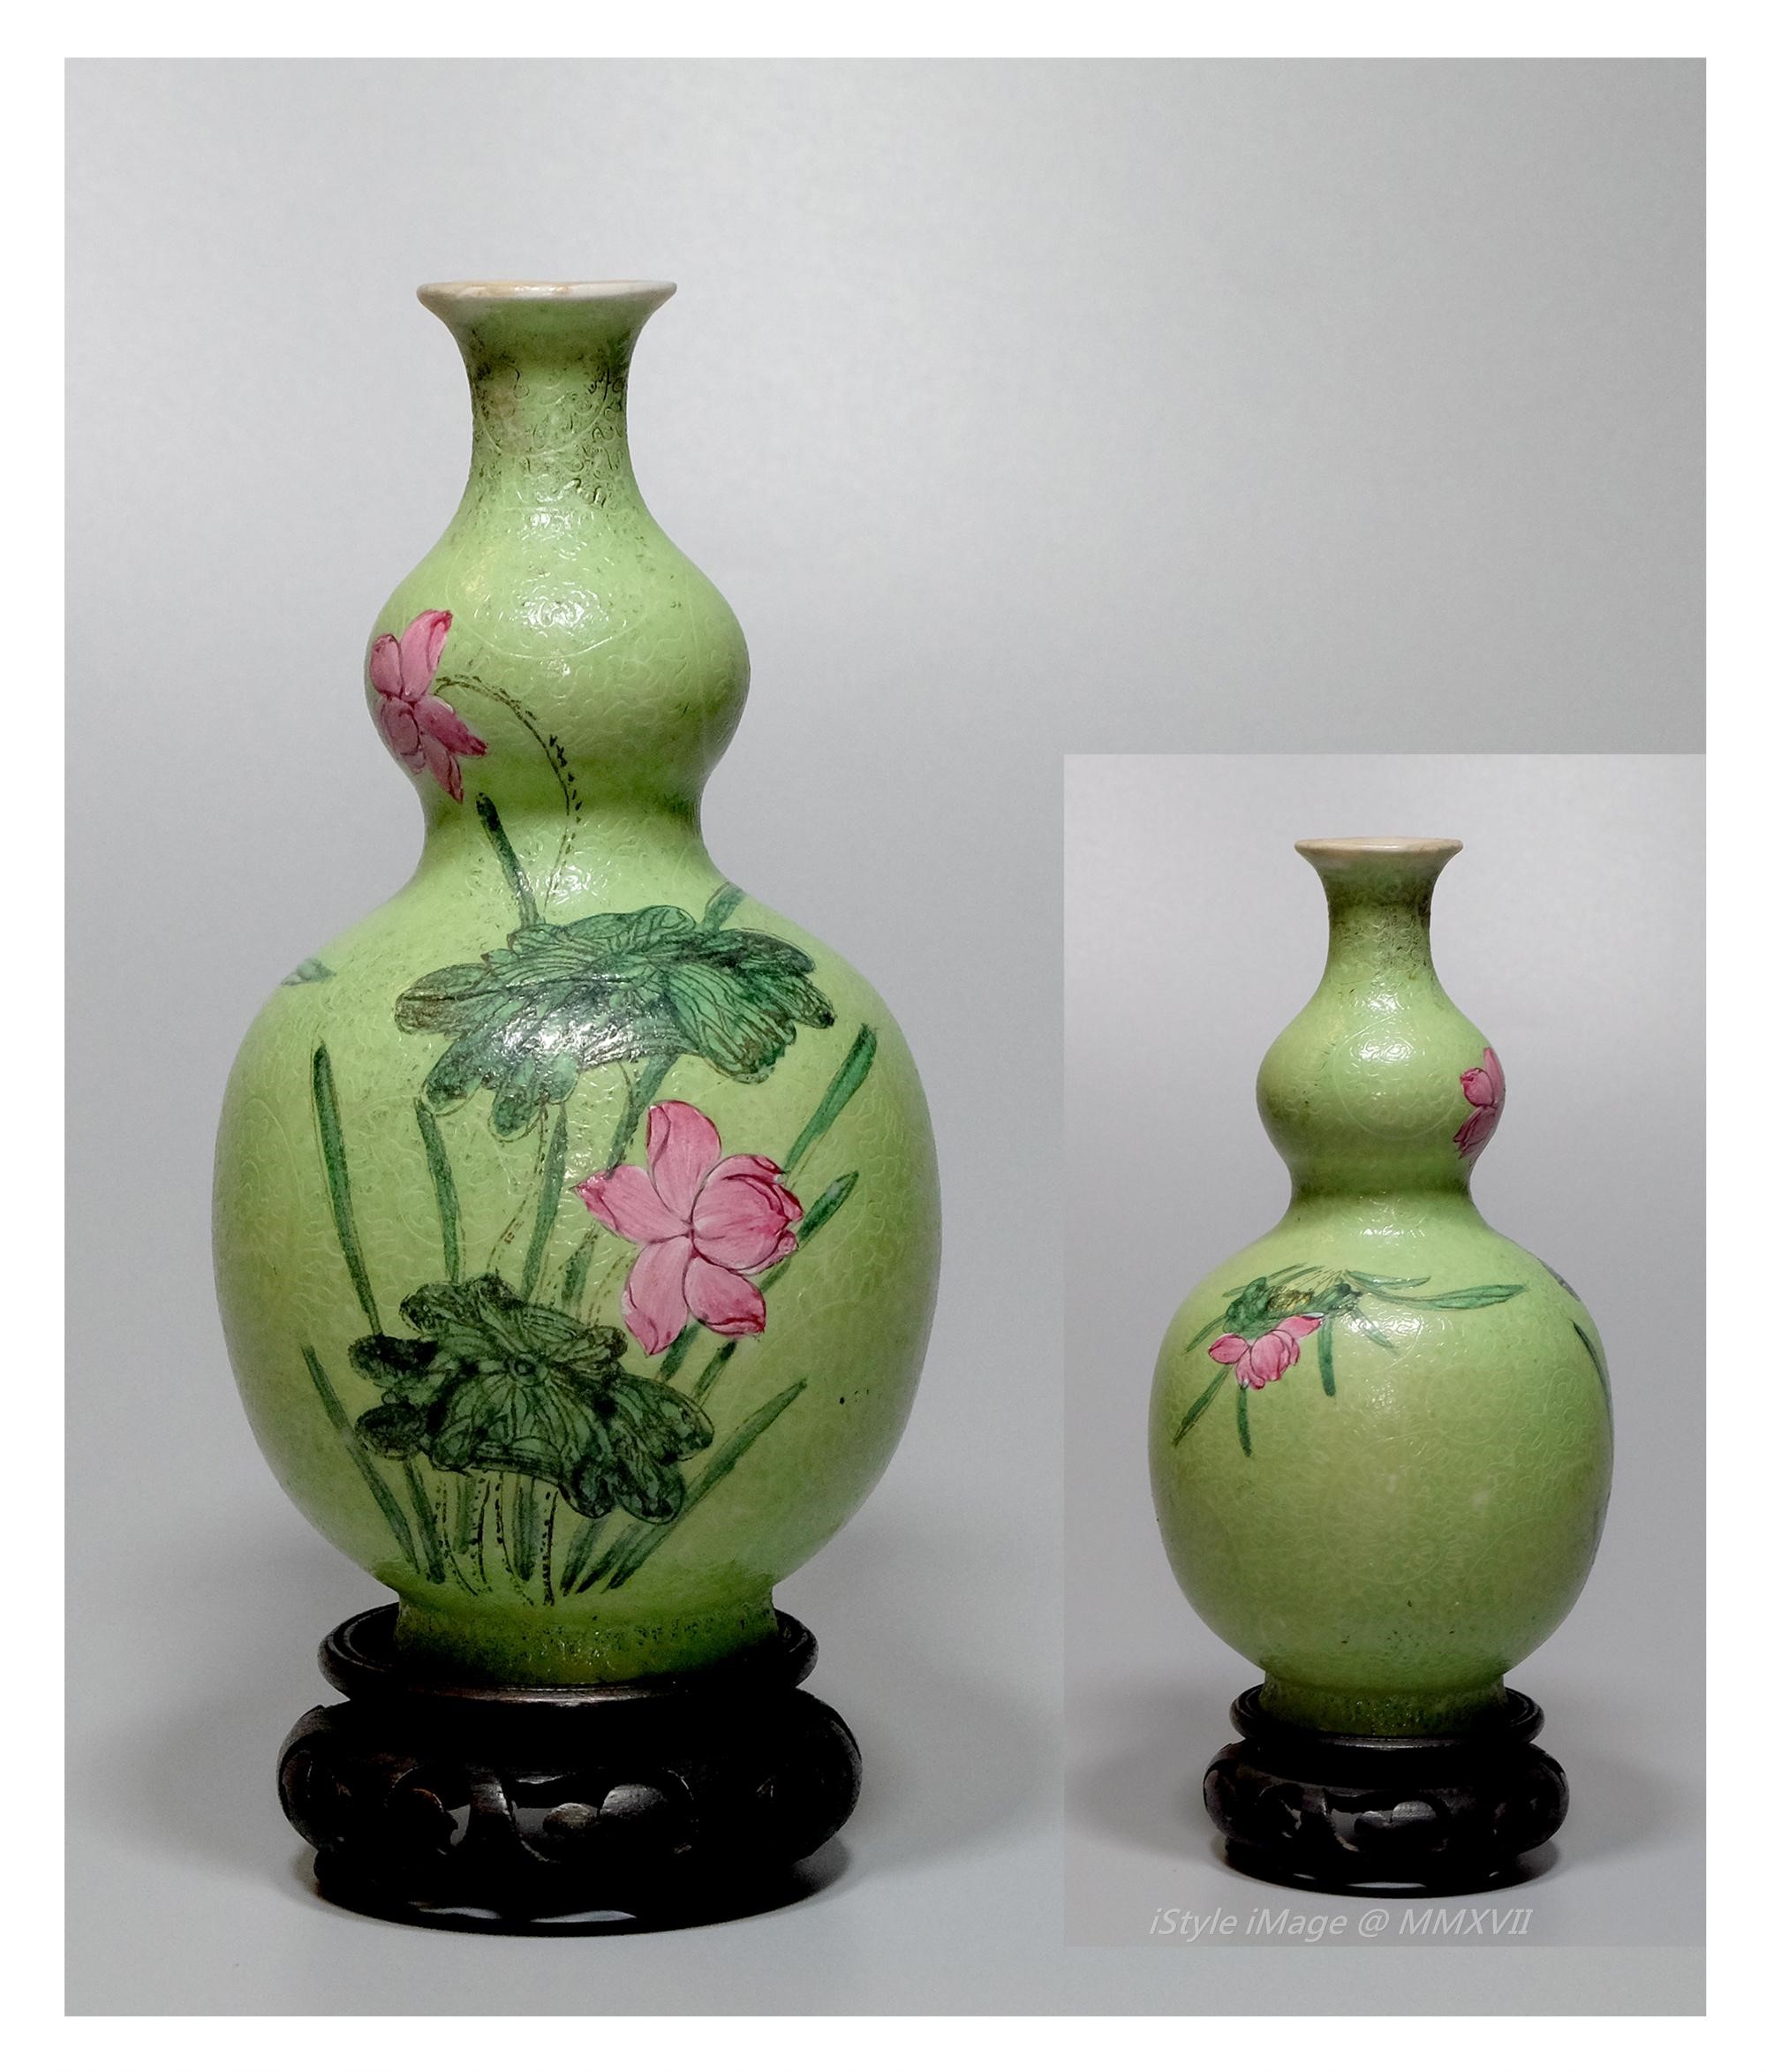 <br><h4>Lot 29 : A famille-rose double gourd shaped vase  ( 50's last century )</h4>
					A famille-rose double gourd shaped vase painted with magnolia flower reserved on a bright green ground.
					<br>Measurements (H) high 17.5 CM, (W)width 9.5 CM<br><br><br>粉彩葫蘆形花瓶  ( 上世紀五十年代 )<br>粉彩葫蘆形花瓶繪上木蘭花在明亮的綠色瓶身上。<br>尺寸(H)高 17.5 厘米,  (W)濶9.5 厘米